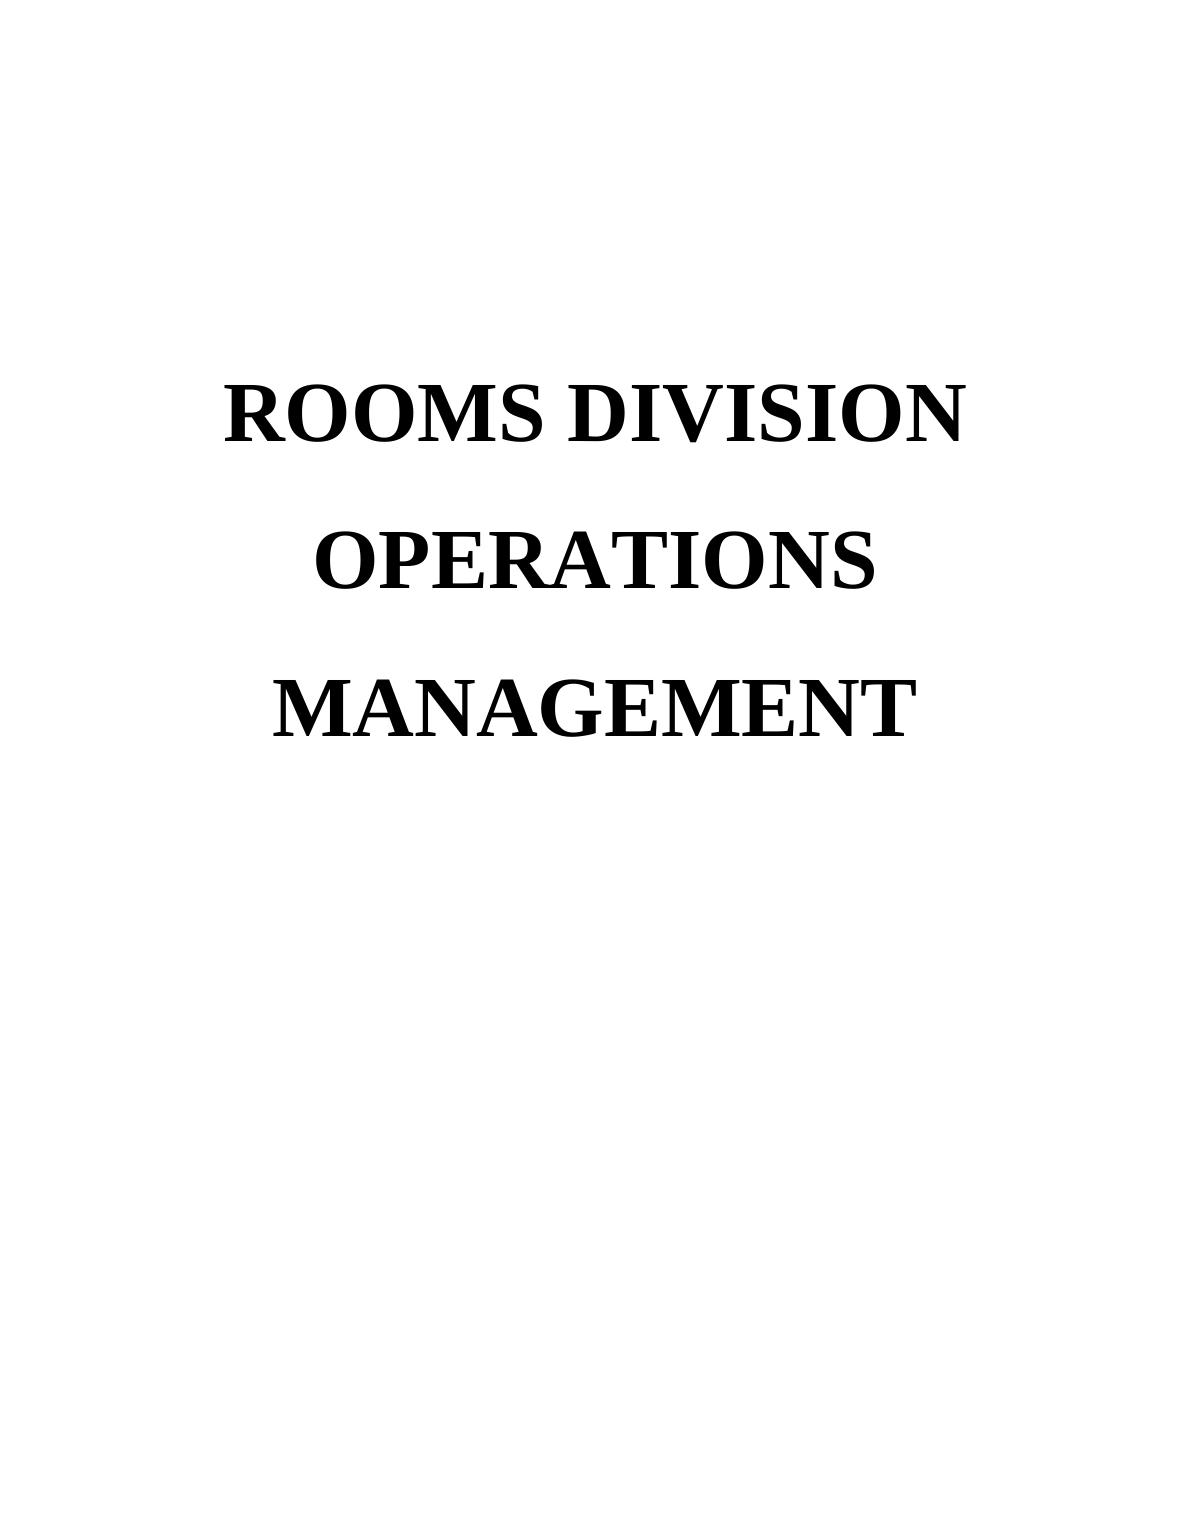 Rooms Division Operations Management Assignment - Four Star Hotel_1